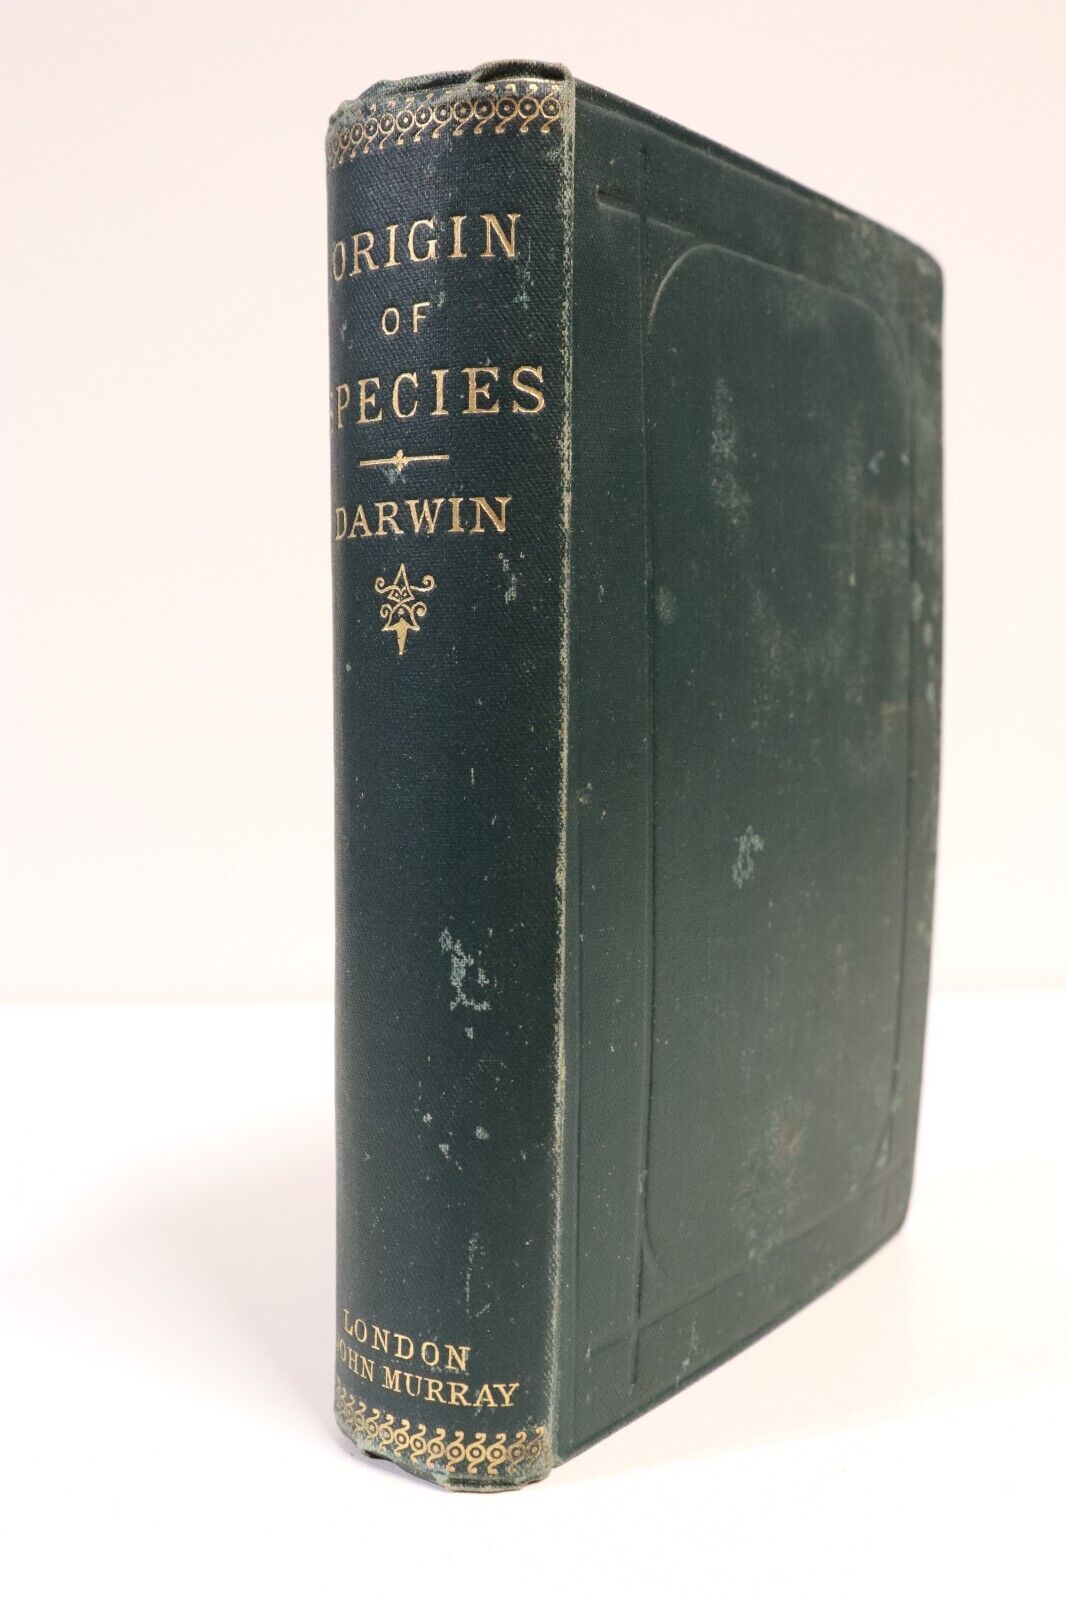 1889 The Origin Of Species by Charles Darwin Antiquarian Natural History Book